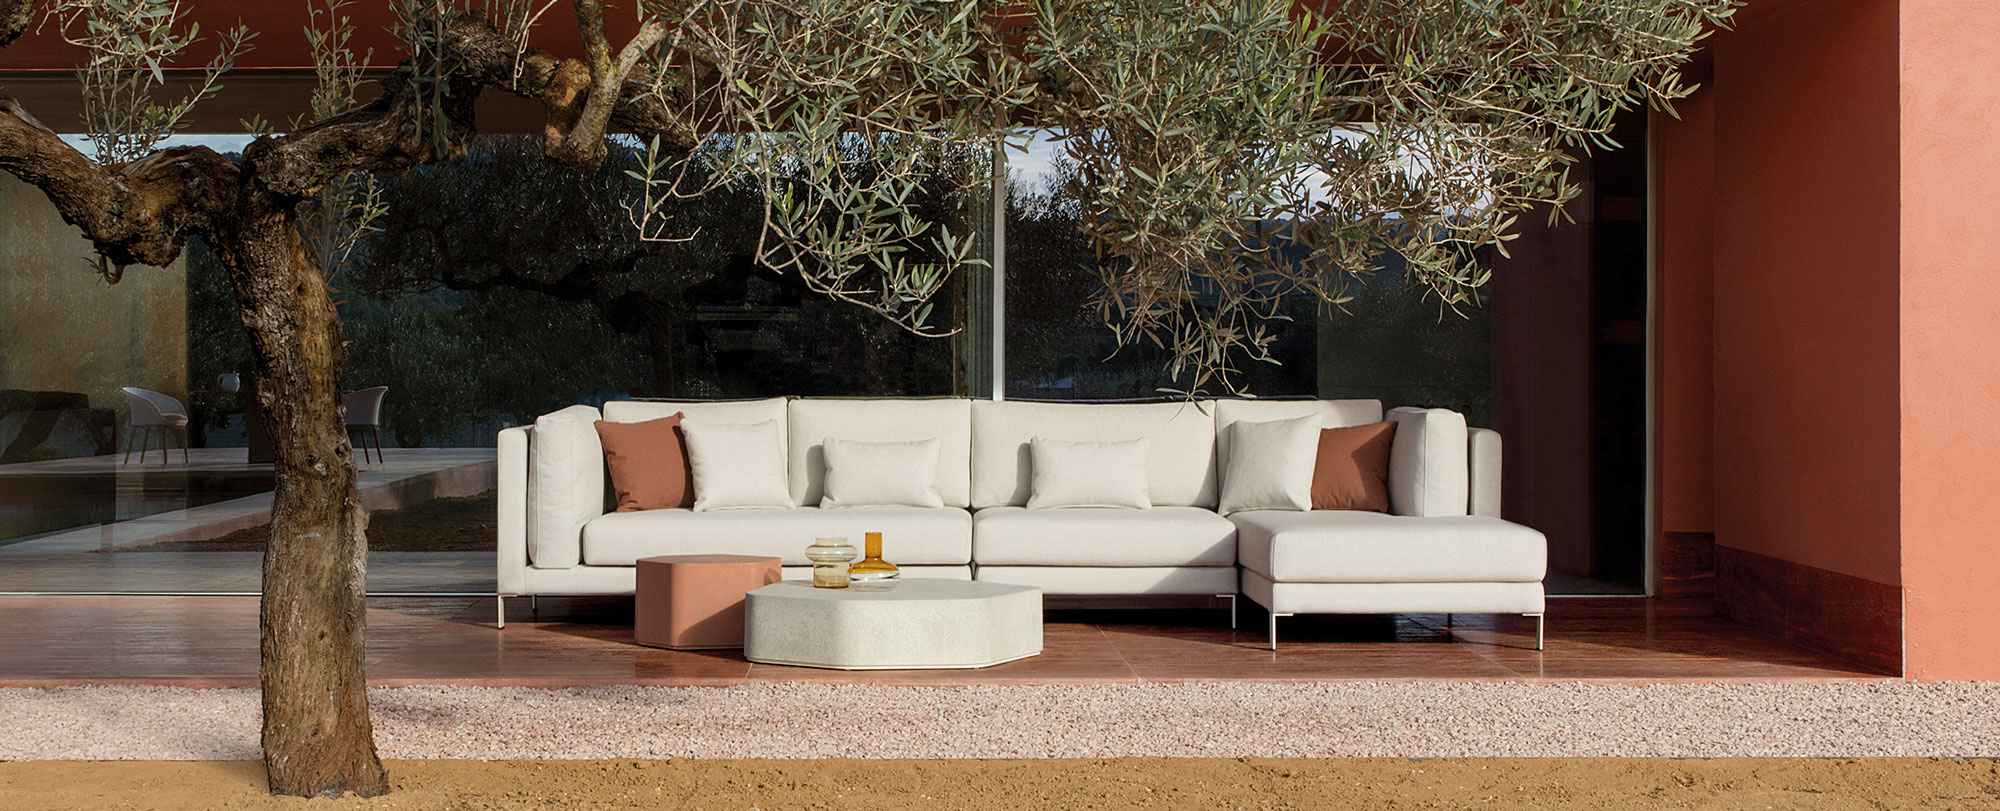 outdoor collection - slim furniture family